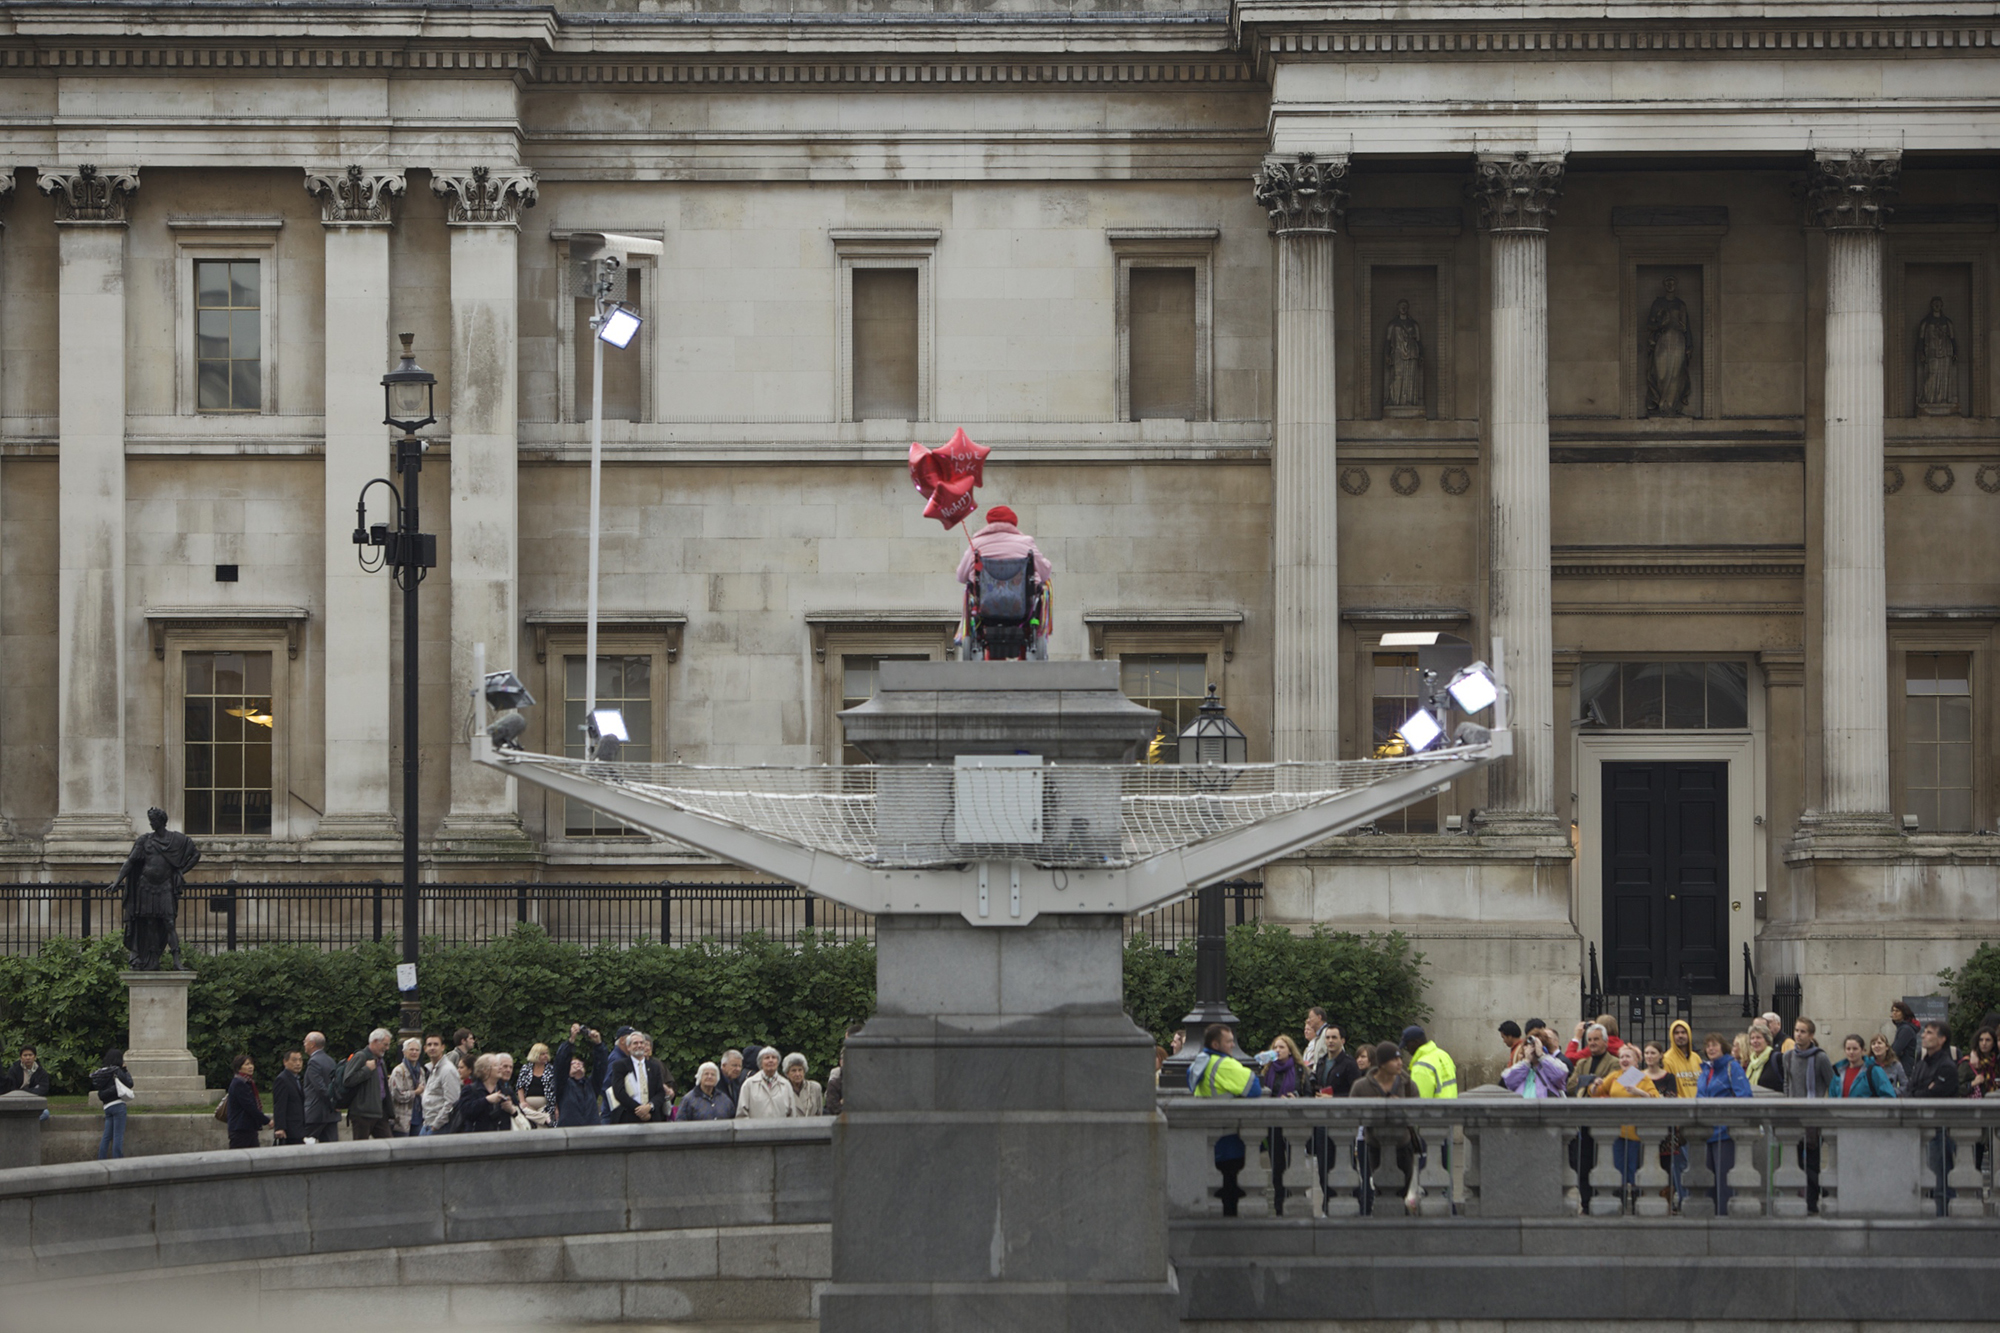 Woman with heart shaped balloon in wheel chair on the Fourth Plinth.